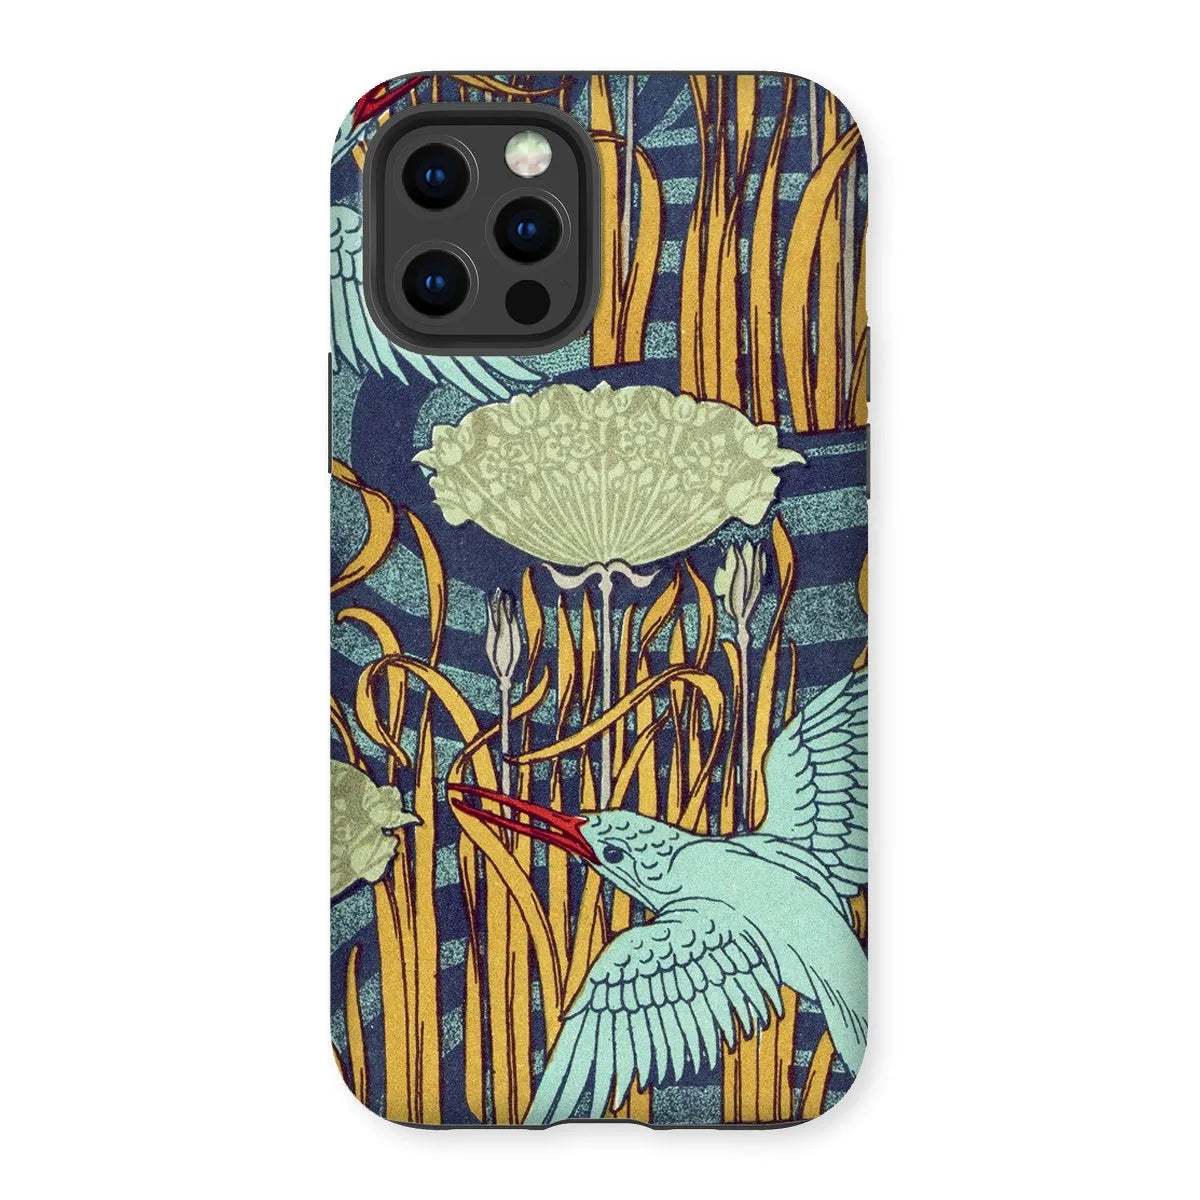 Kingfishers French Art Phone Case - Maurice Pillard Verneuil - Iphone 12 Pro / Matte - Mobile Phone Cases - Aesthetic